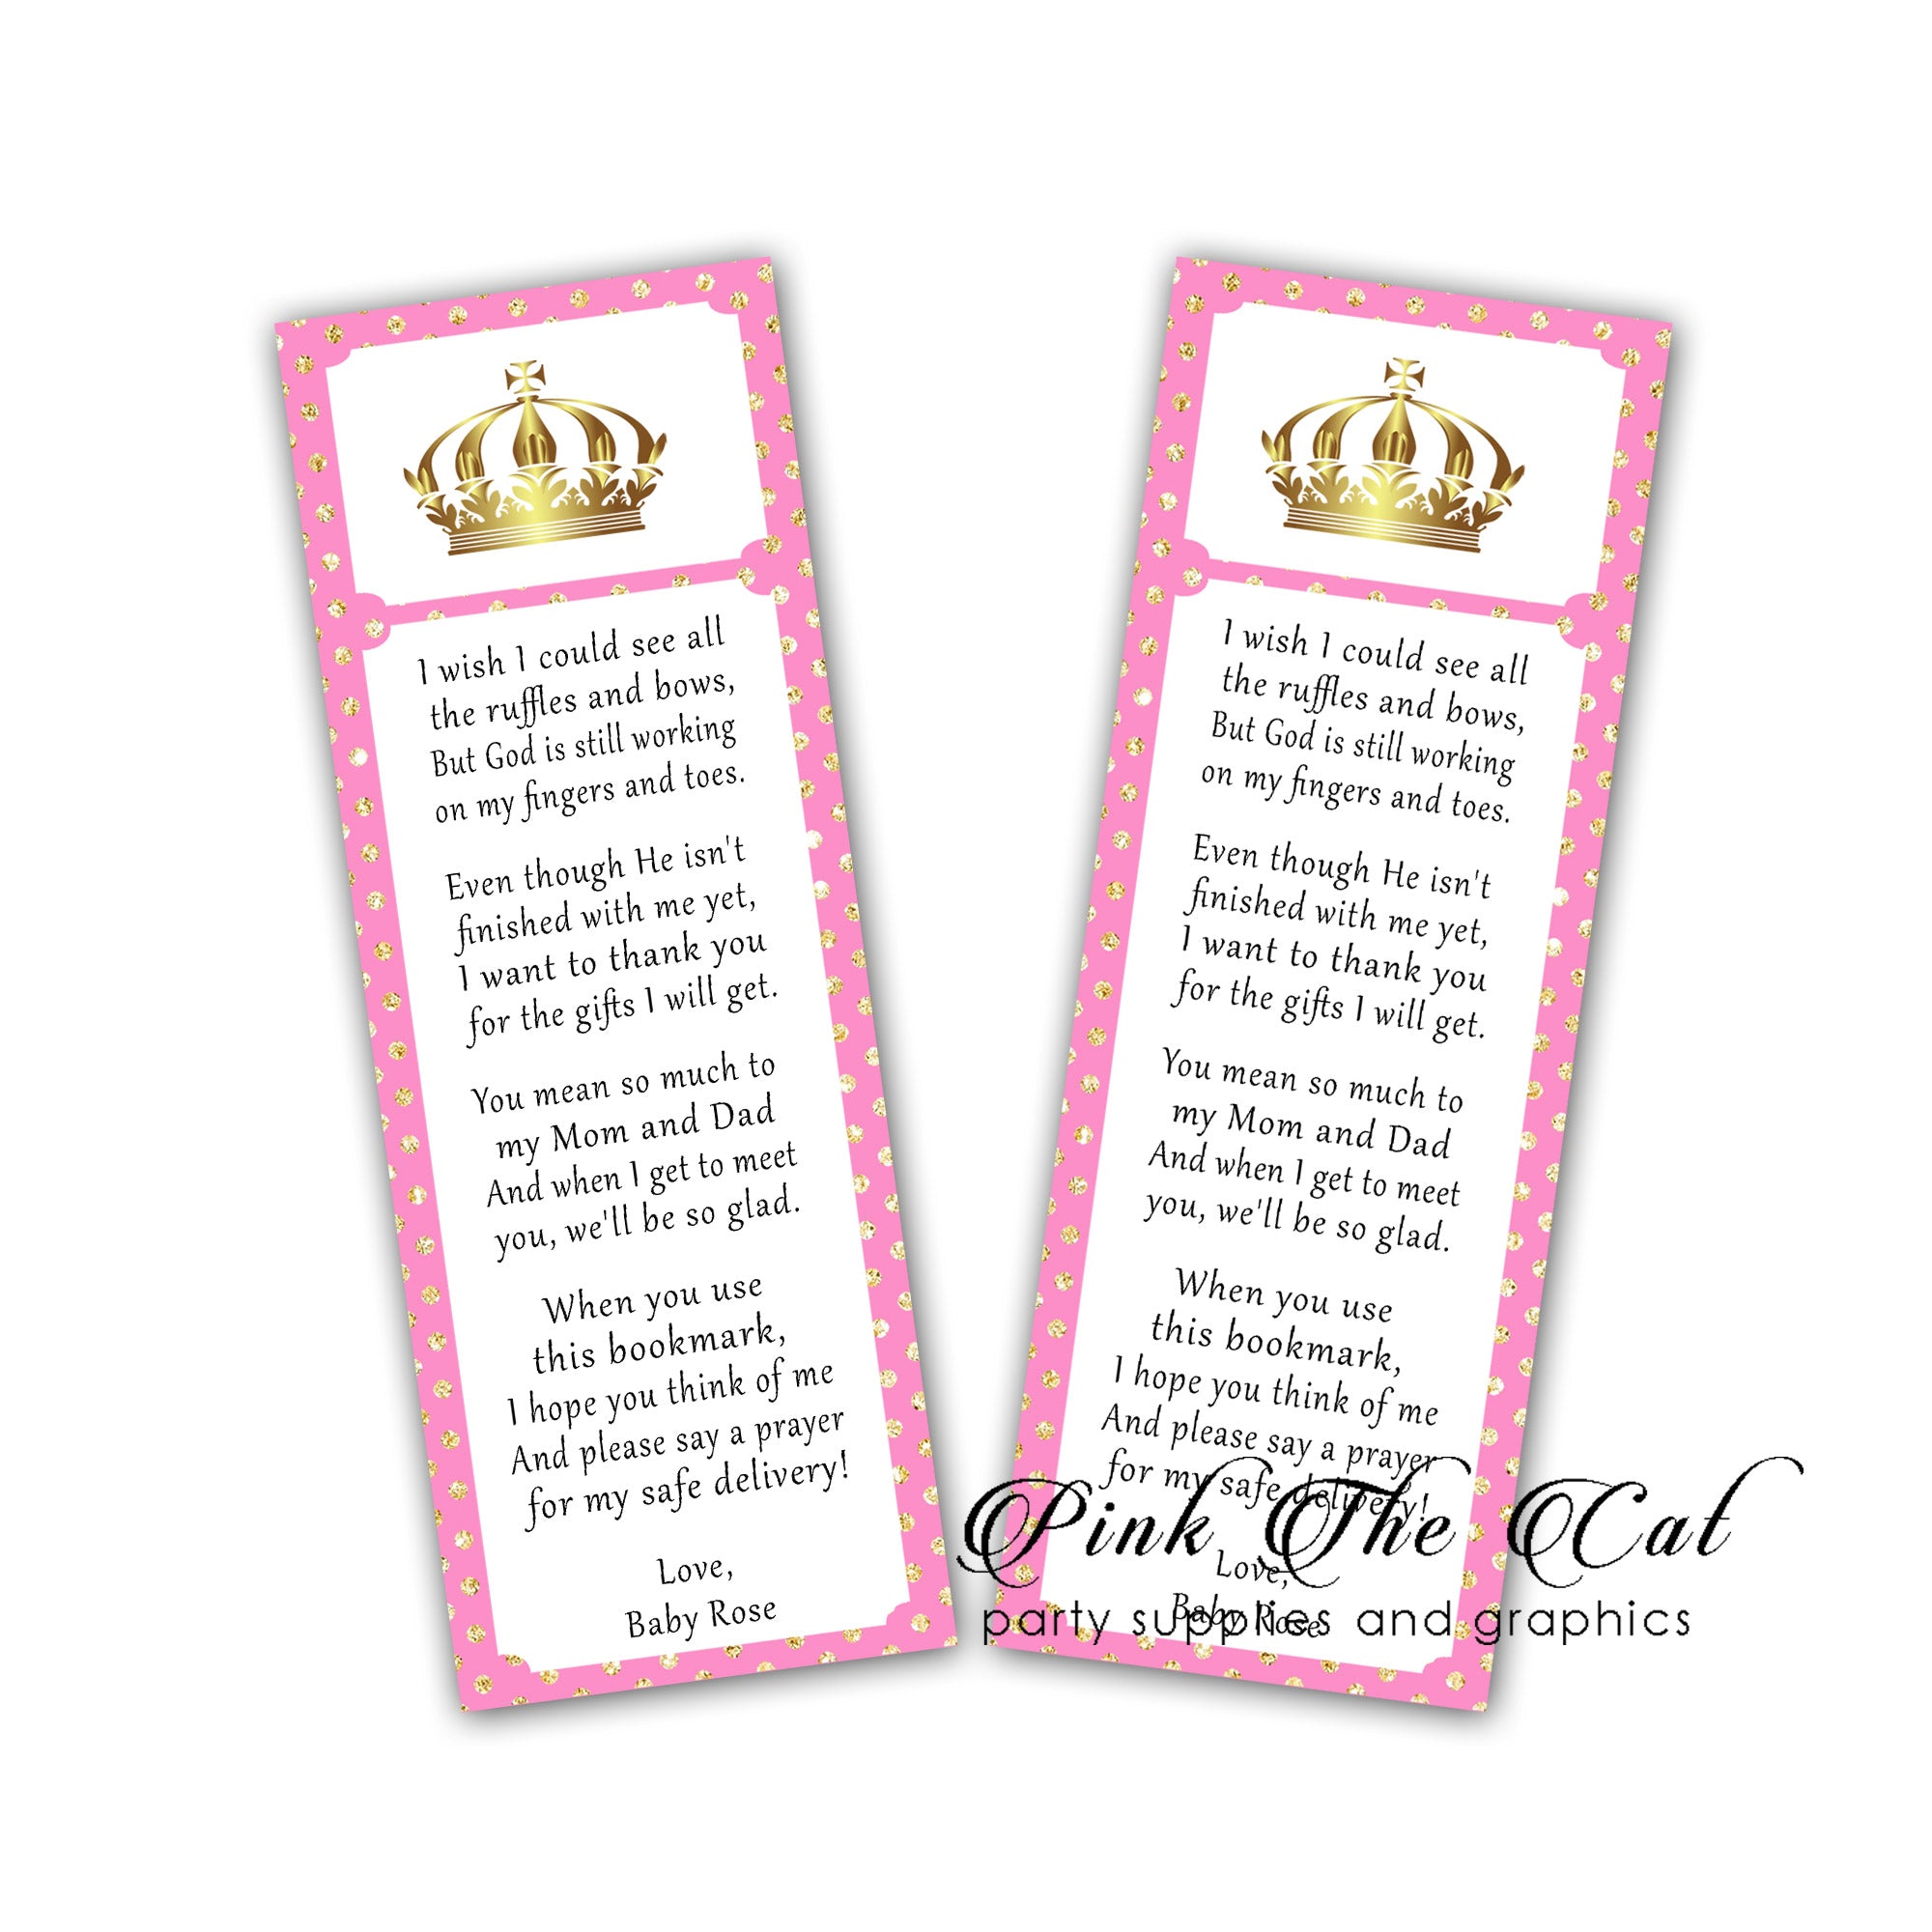 25 Princess bookmarks pink gold personalized baby shower favors